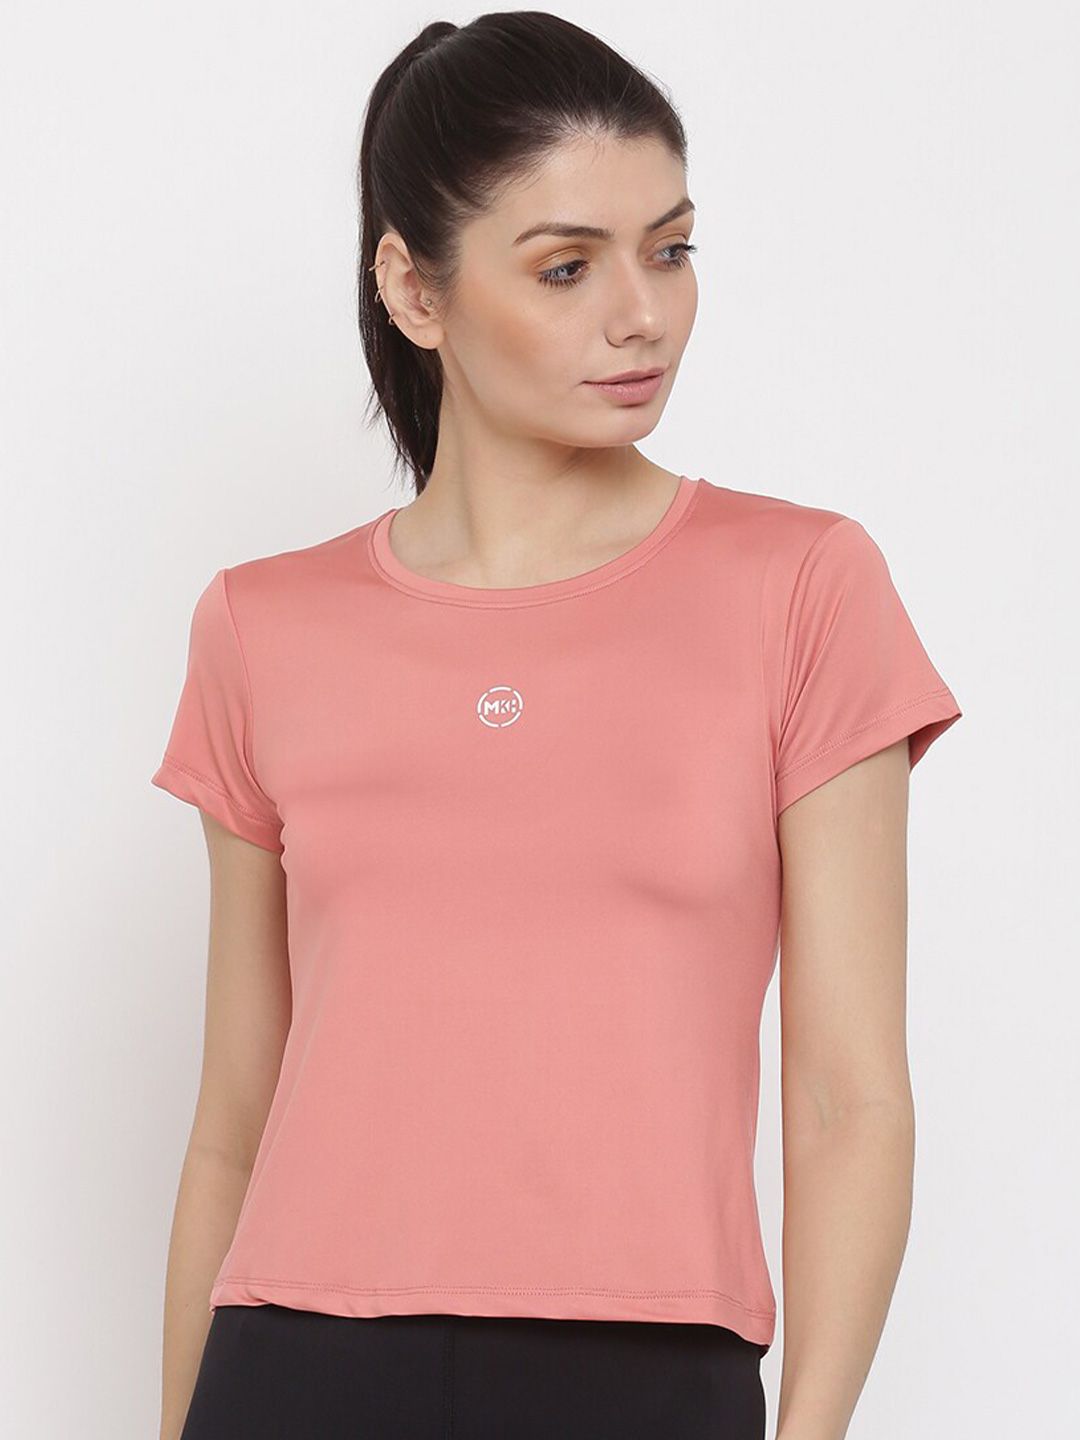 MKH Women Pink Solid Dri-FIT Running T-shirt Price in India